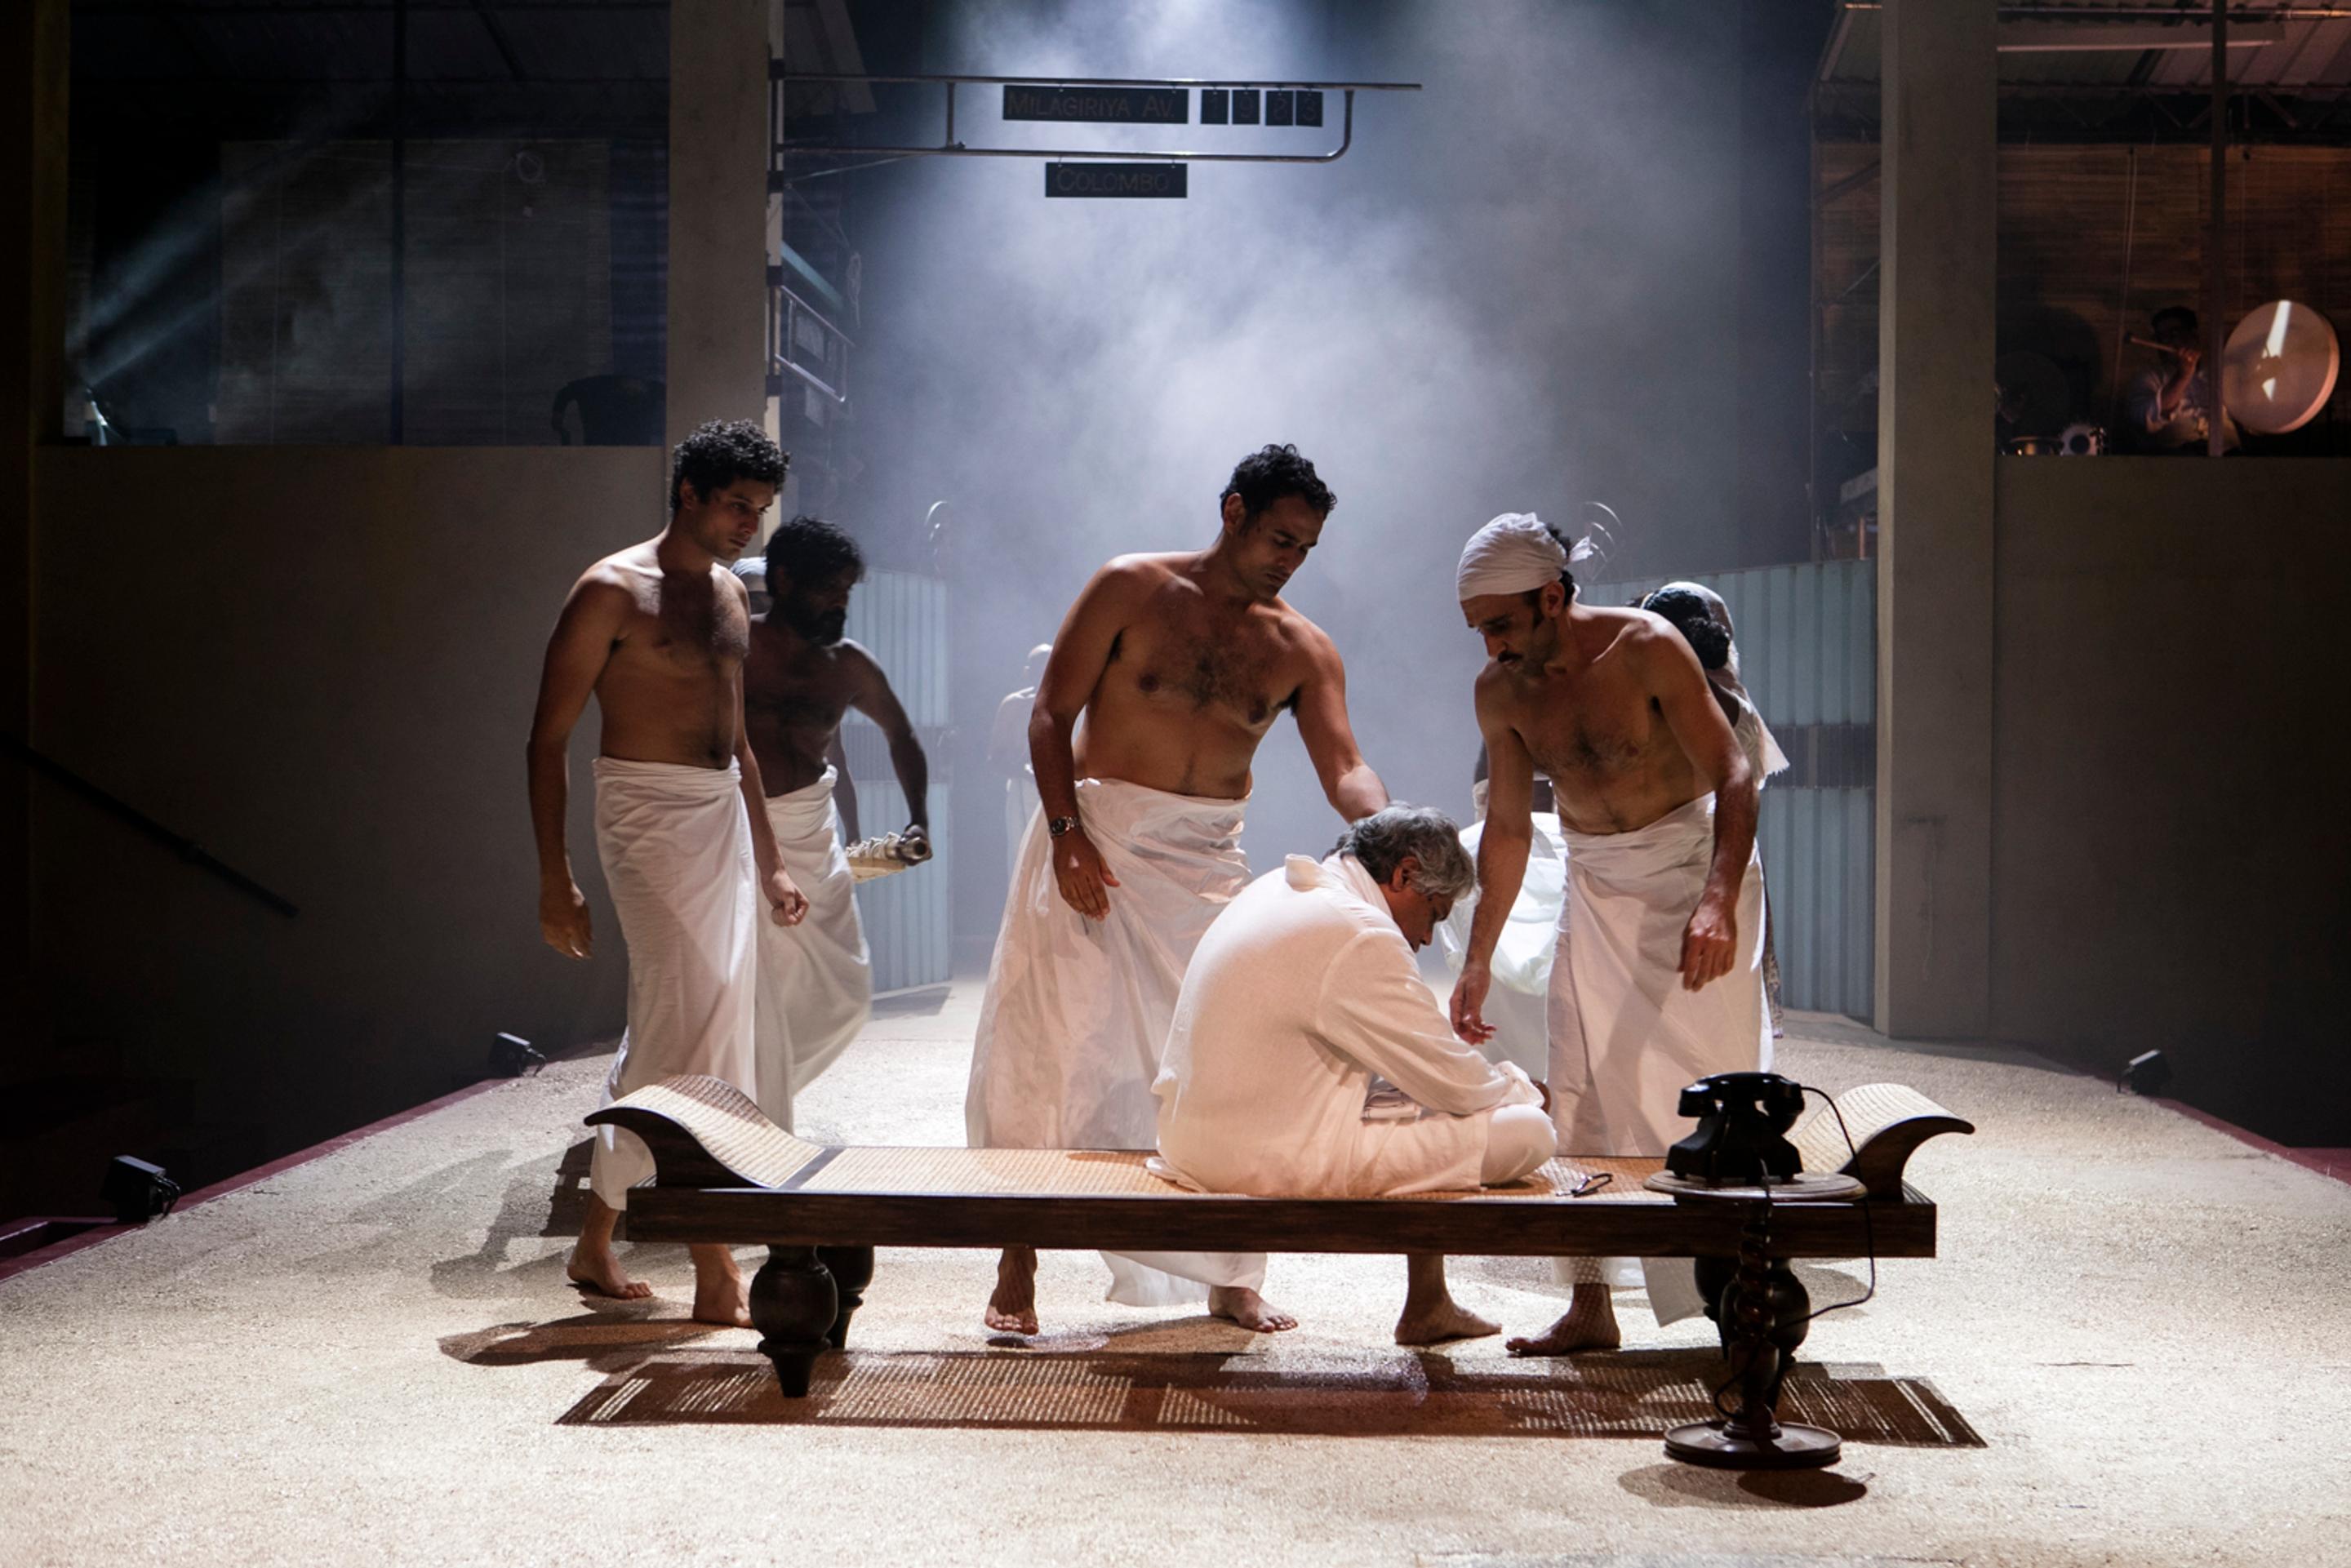 Men dressed in traditional white clothing and head wraps participate in a ceremonial activity around a long wooden bench, set against a smoky, atmospheric stage backdrop.